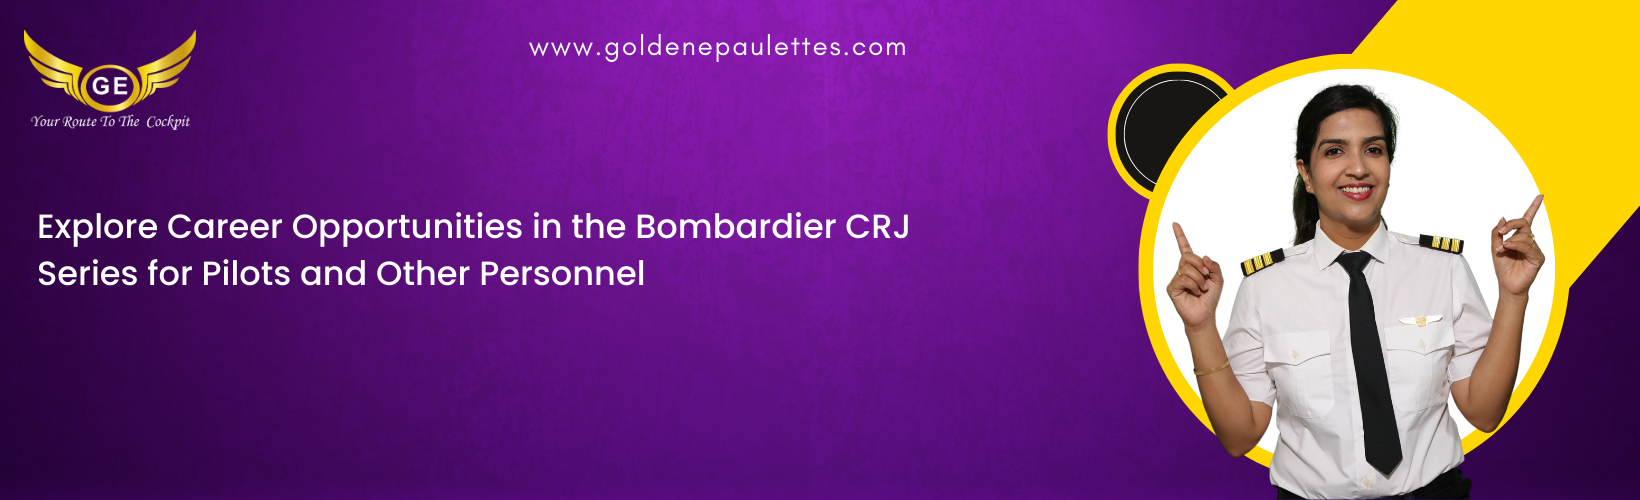 6.Career Opportunities in the Bombardier CRJ Series